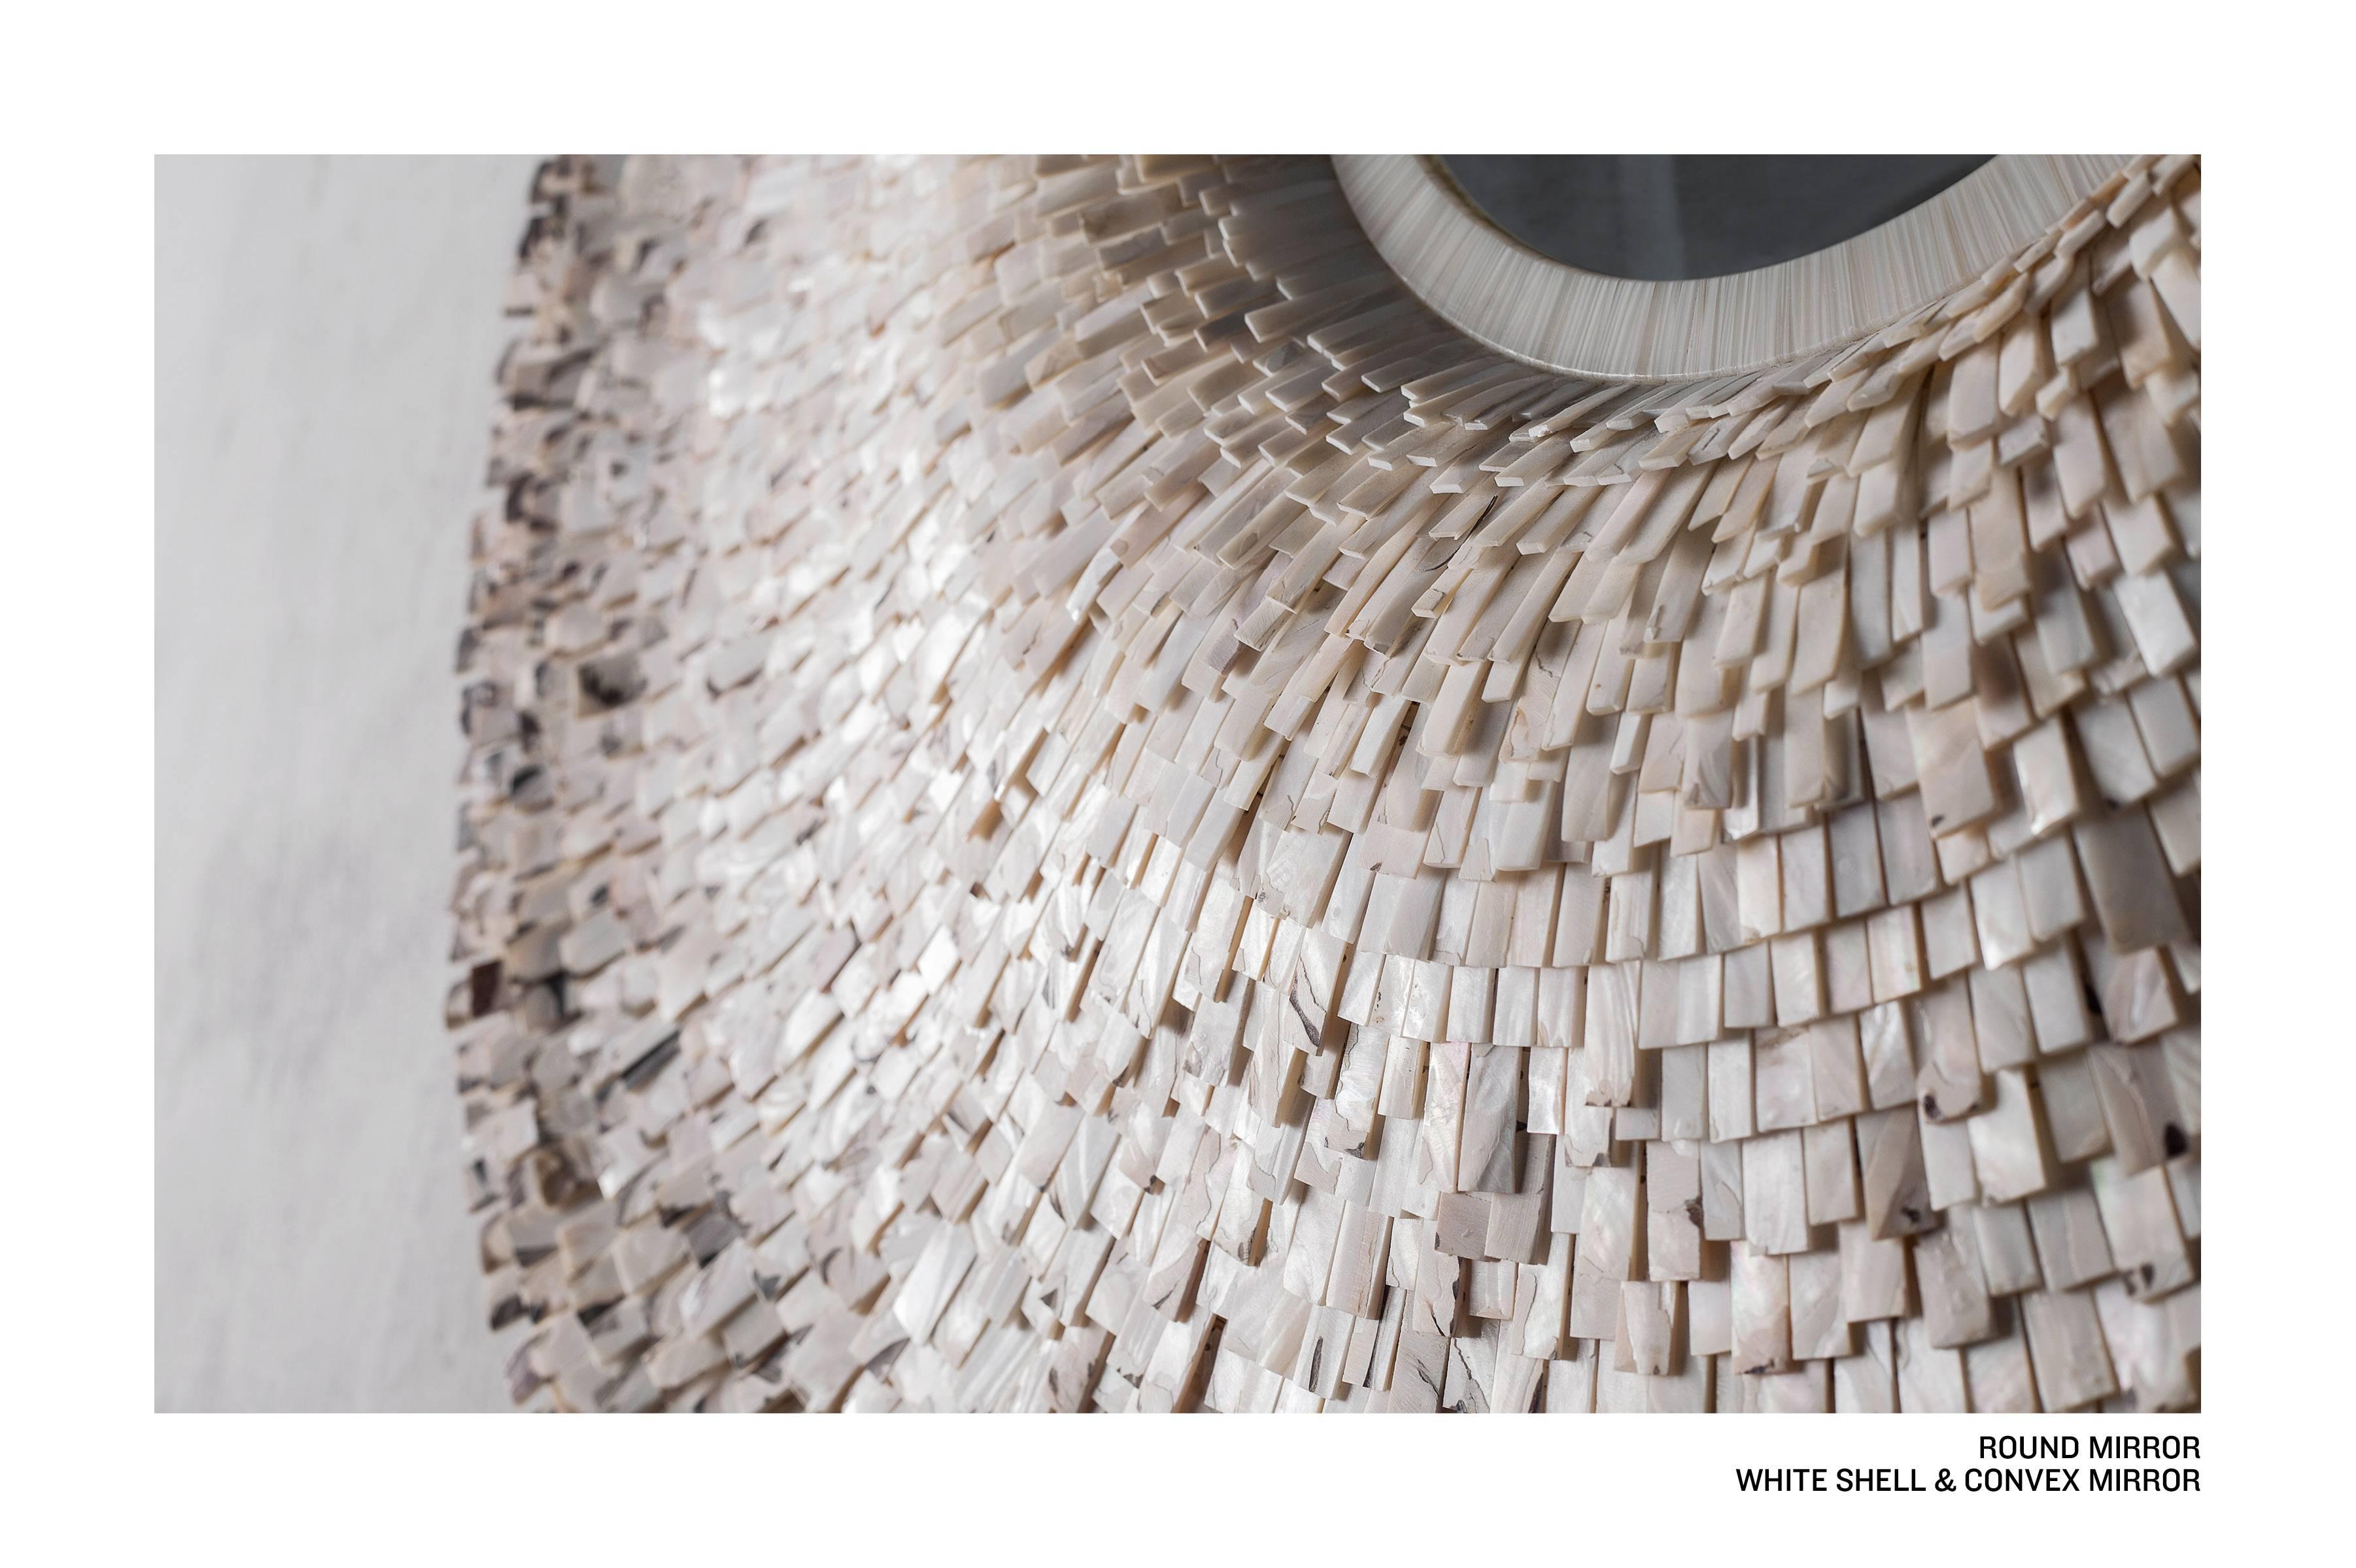 Stunning handcrafted large round mirror made of thousand white shells assembled in Haute - Couture technique with a convex mirror.
This exceptional piece of art is designed and made by Etienne de Souza.

Dimension: 100 cm
Packaging dimension: 127 cm